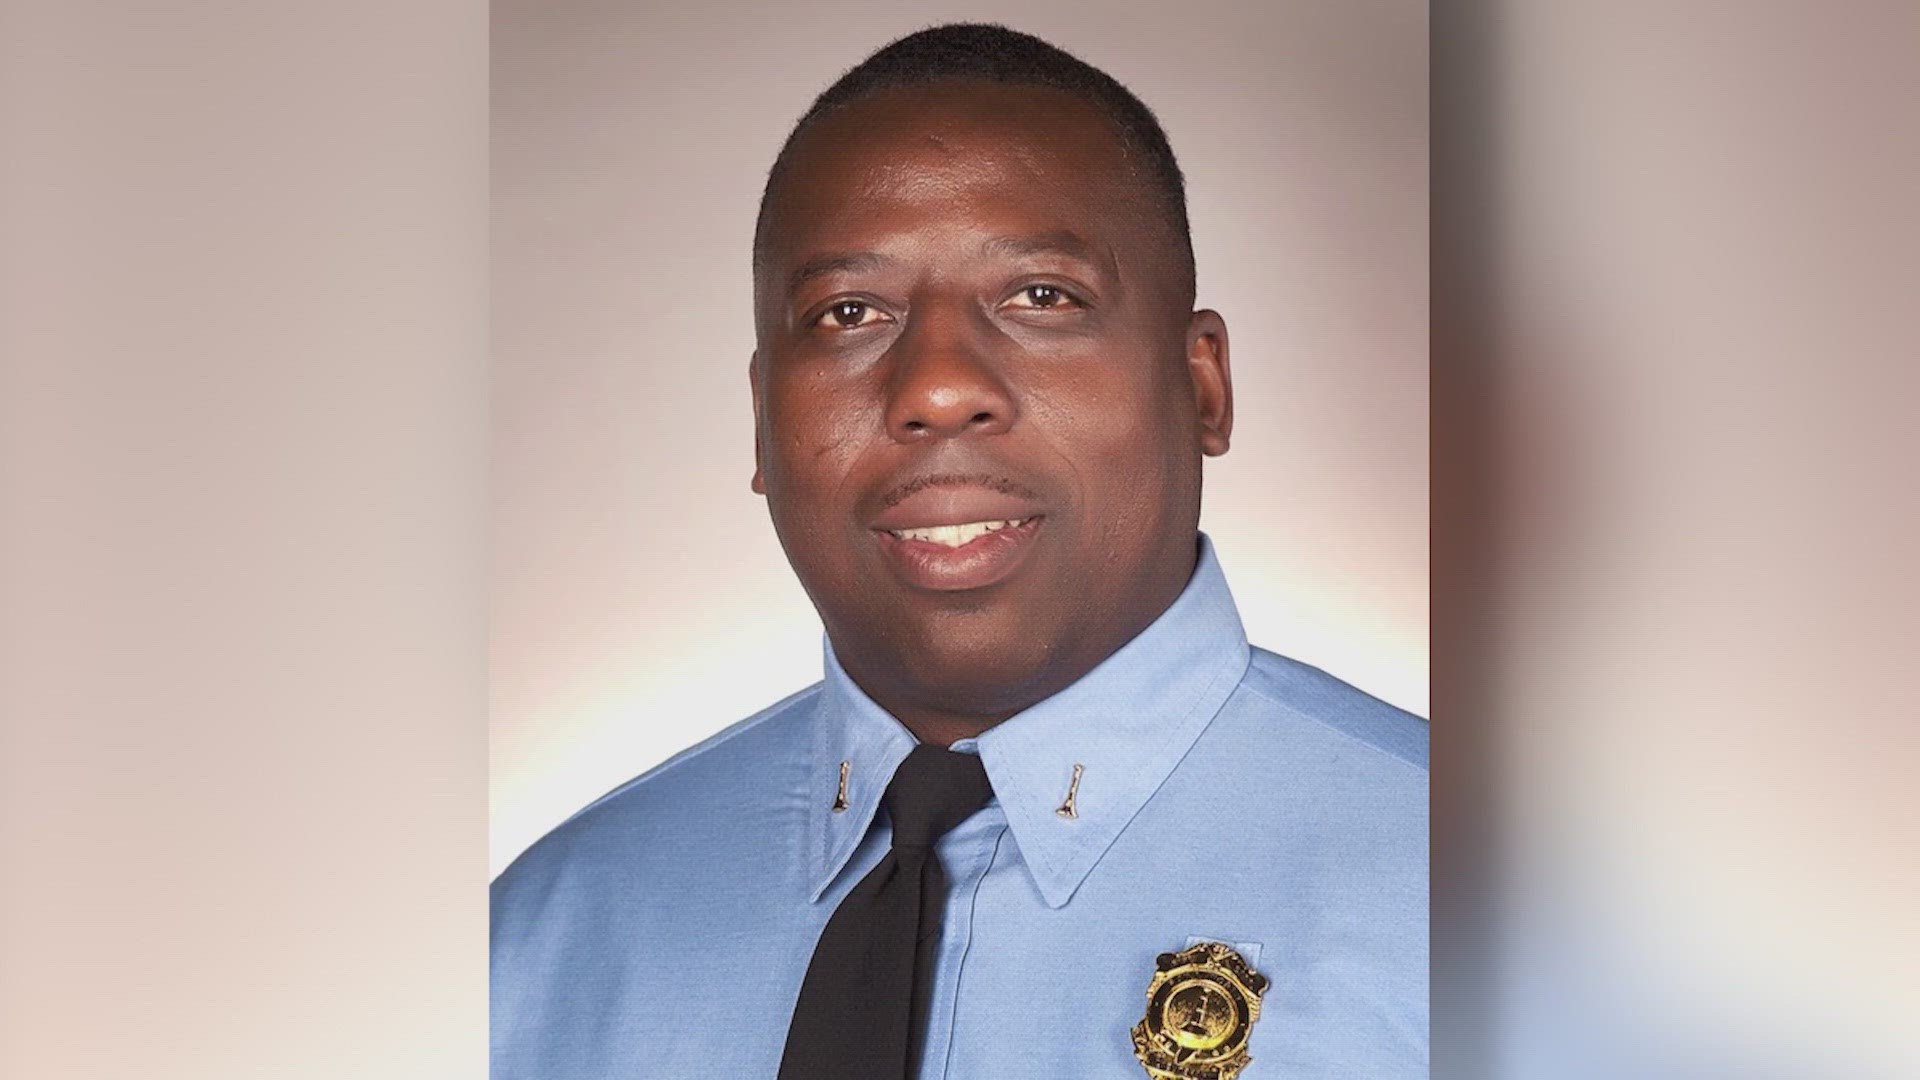 Lt. Garey Pugh, 56, had worked for the city of Fort Worth for 34 years, according to the fire department.